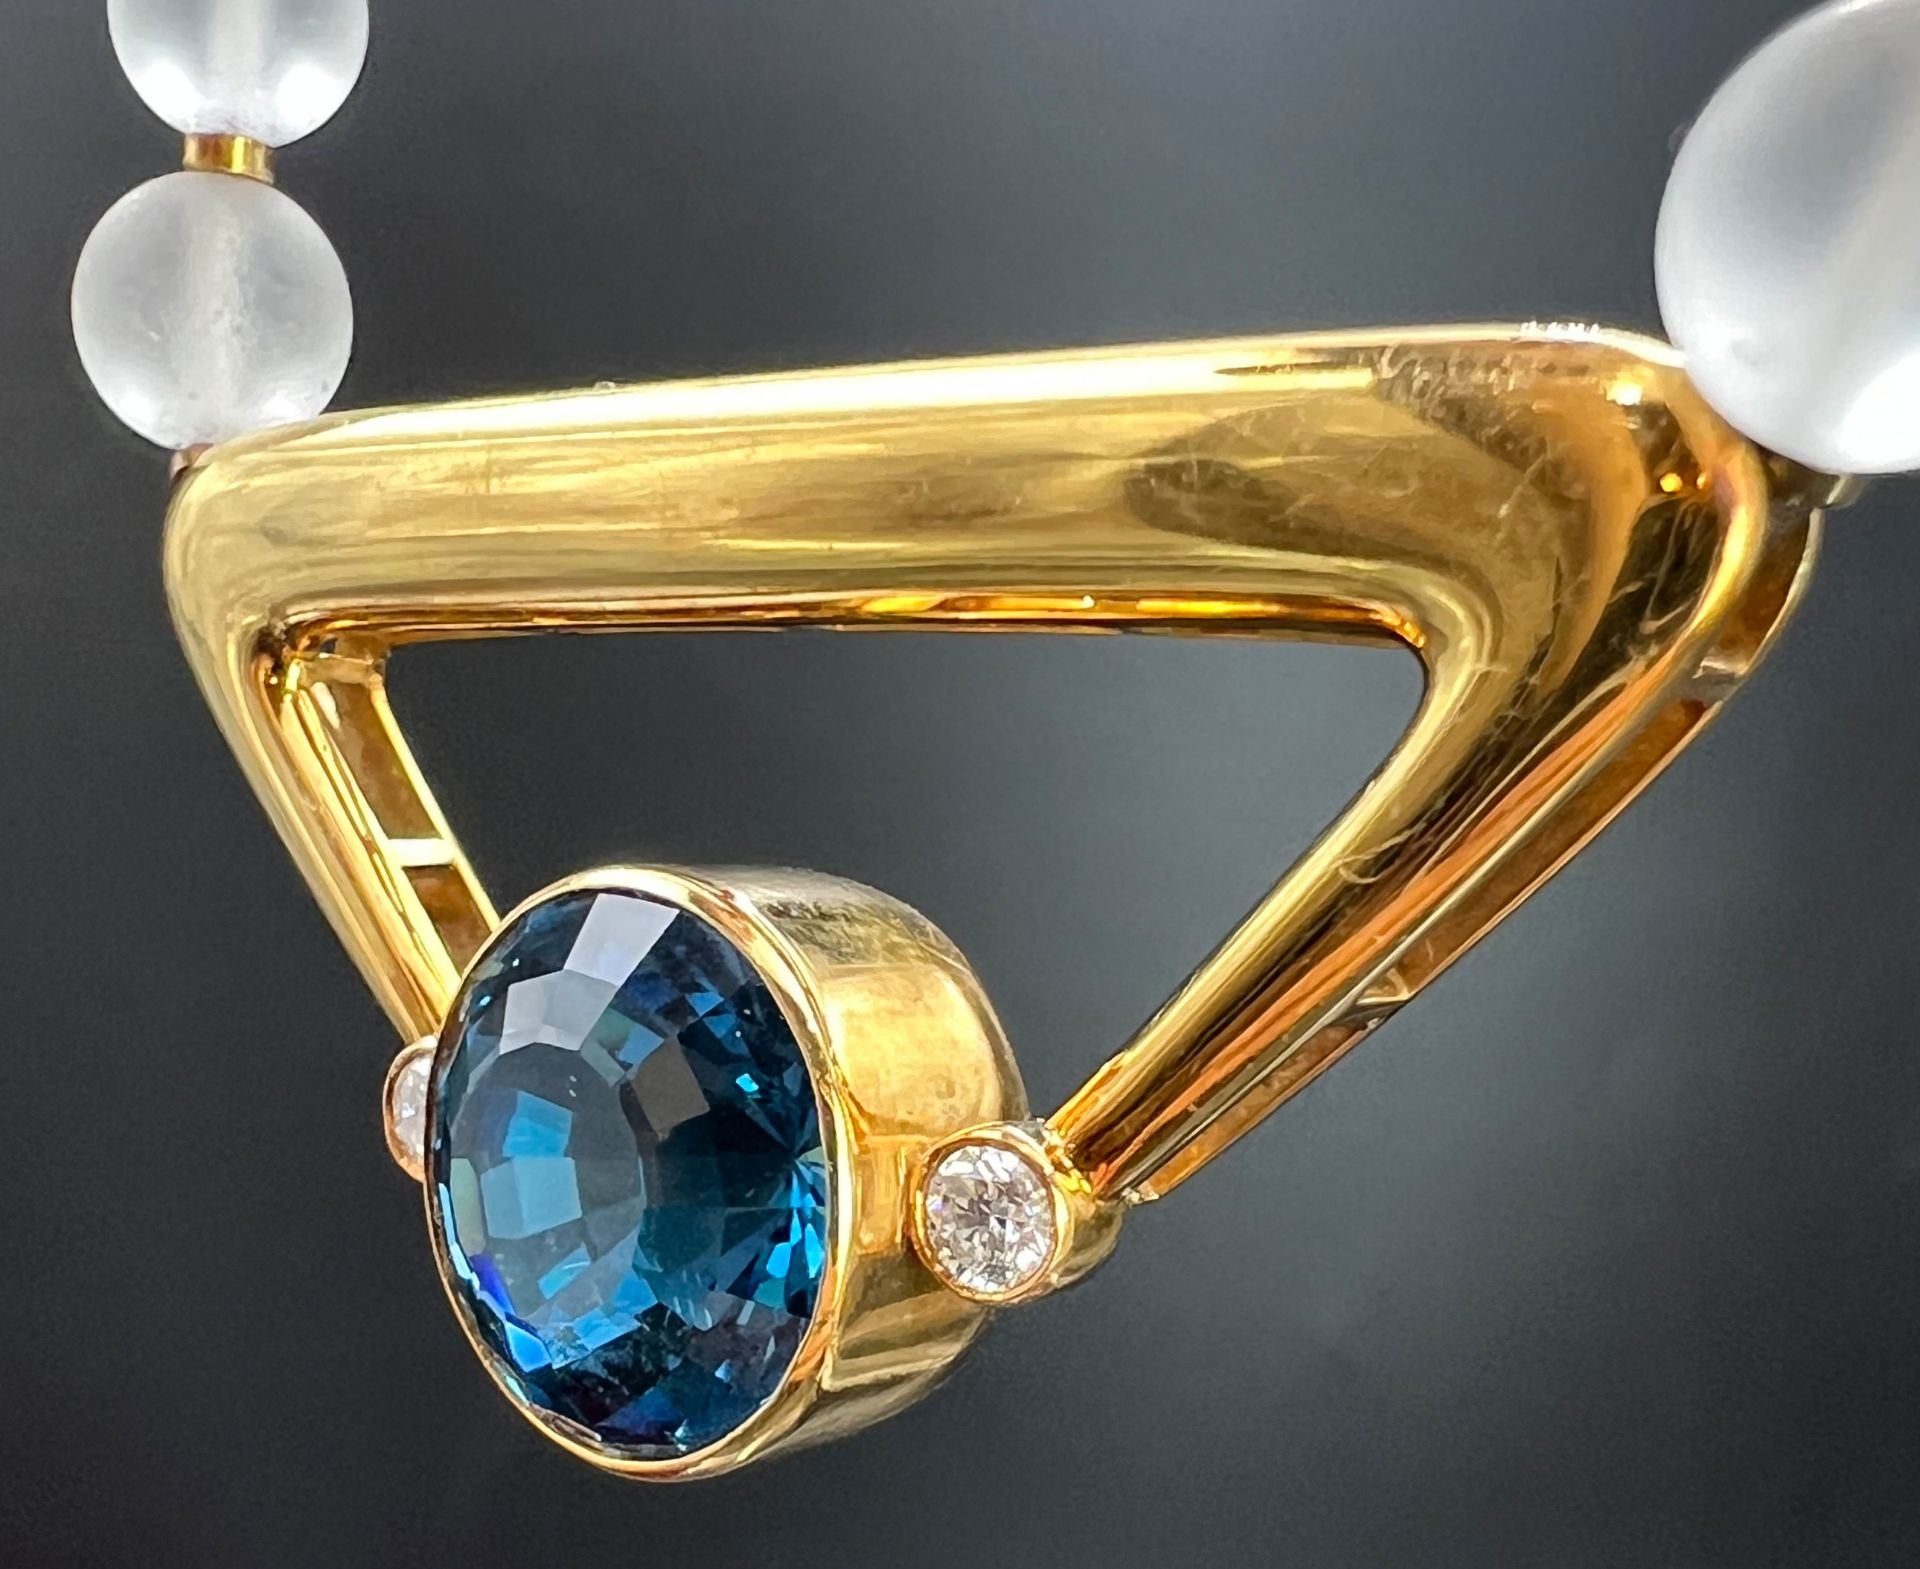 Necklace with rock crystal balls. Centrepiece 750 yellow gold with one topaz and two brilliants. - Image 6 of 18